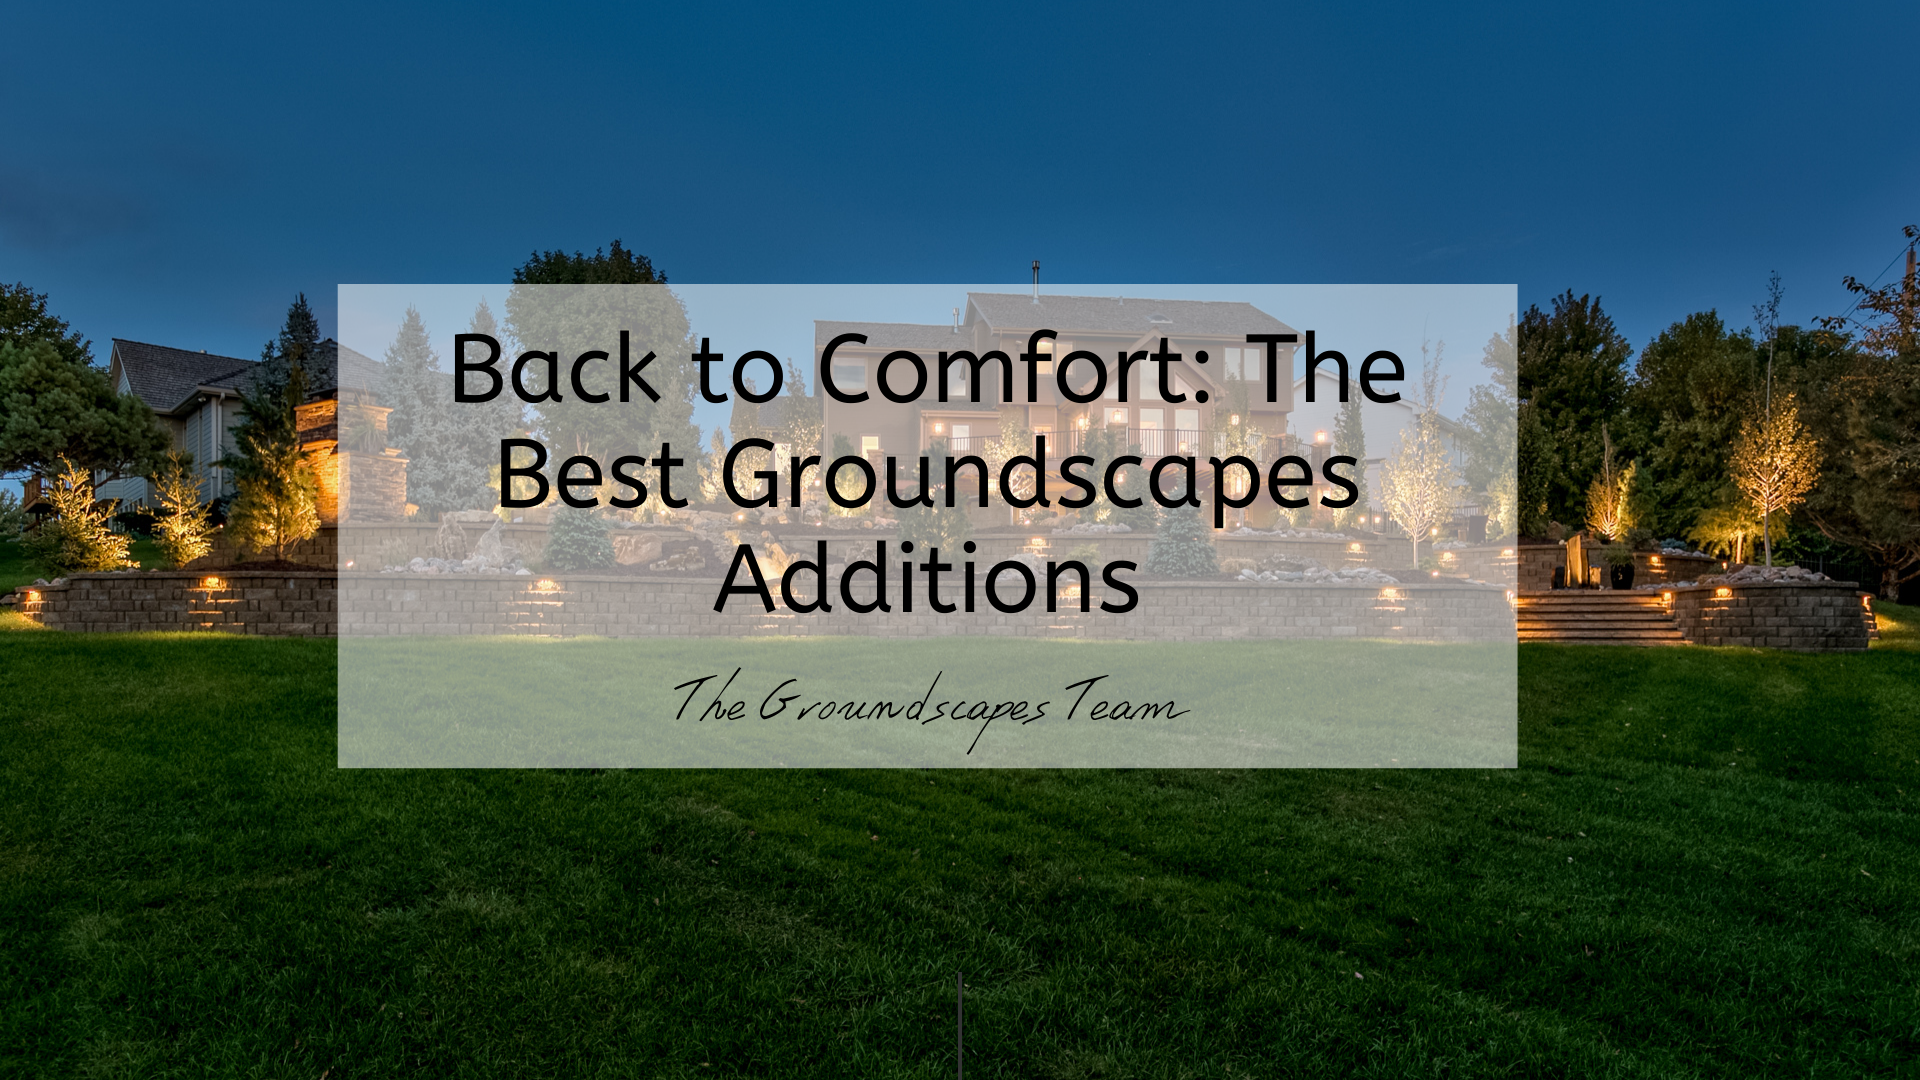 Back to Comfort: The Best Groundscapes Additions